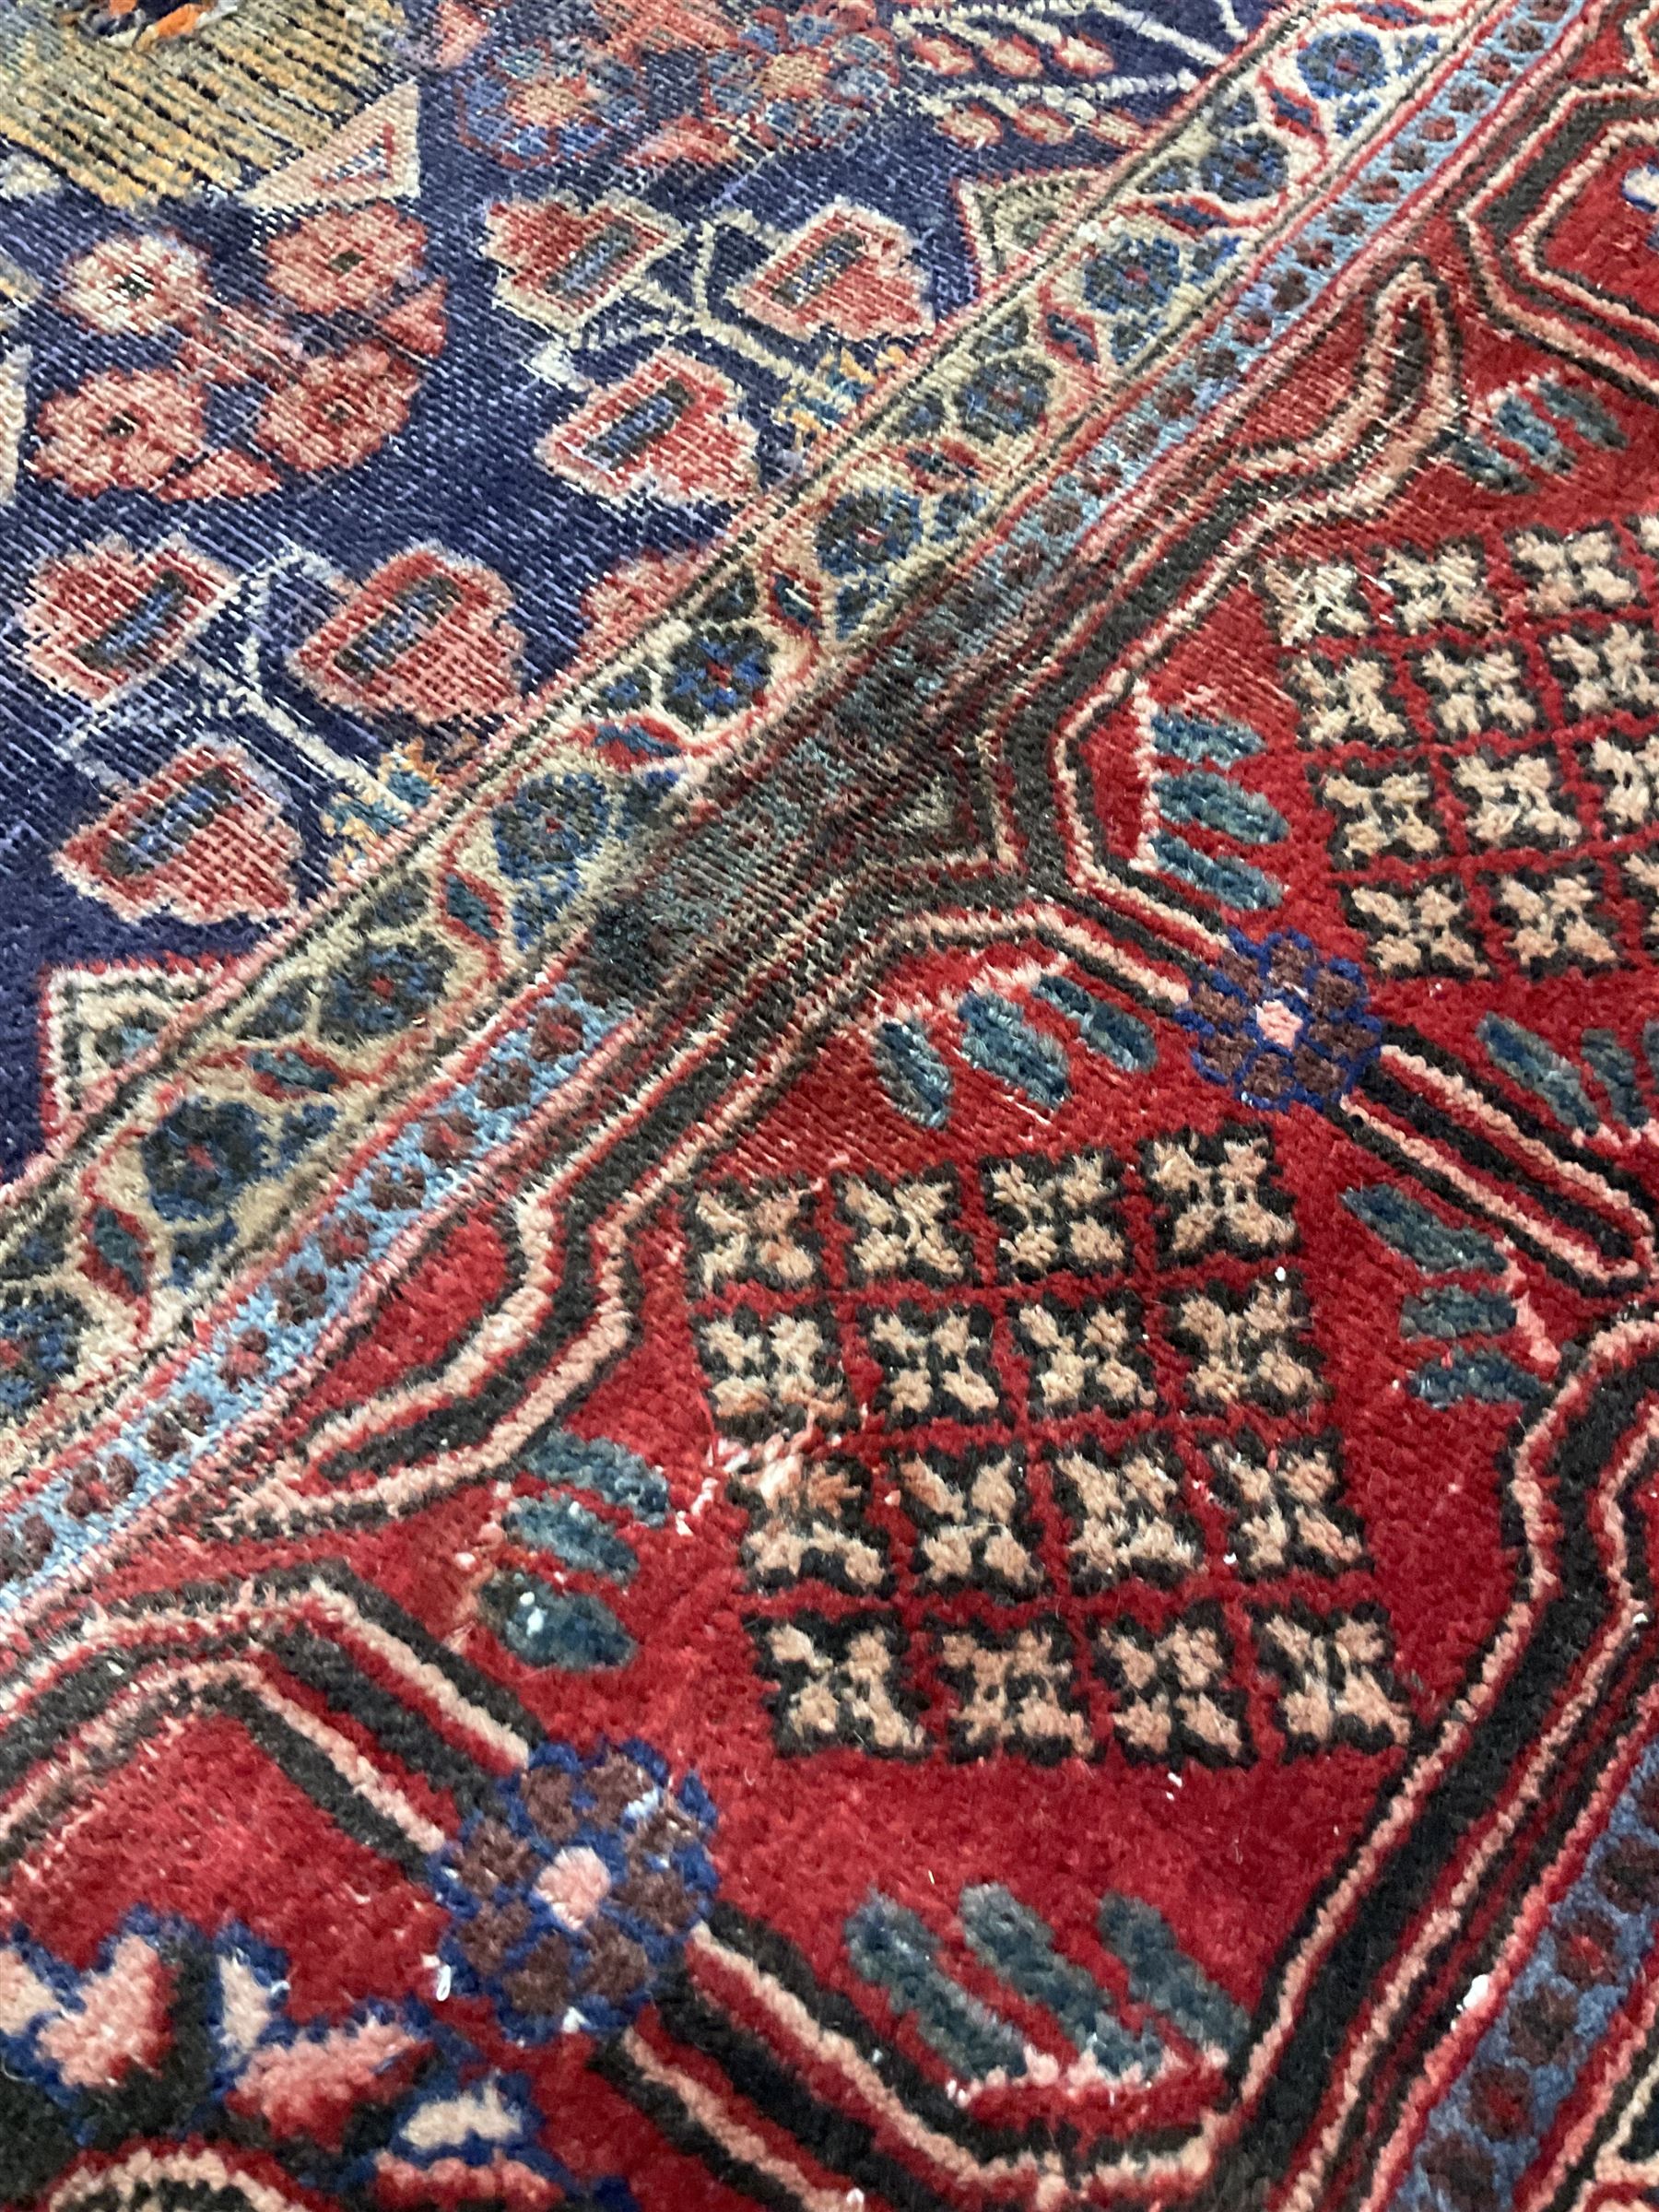 Handknotted Persian rug from Sanandaj region with five red medallions - Image 6 of 7